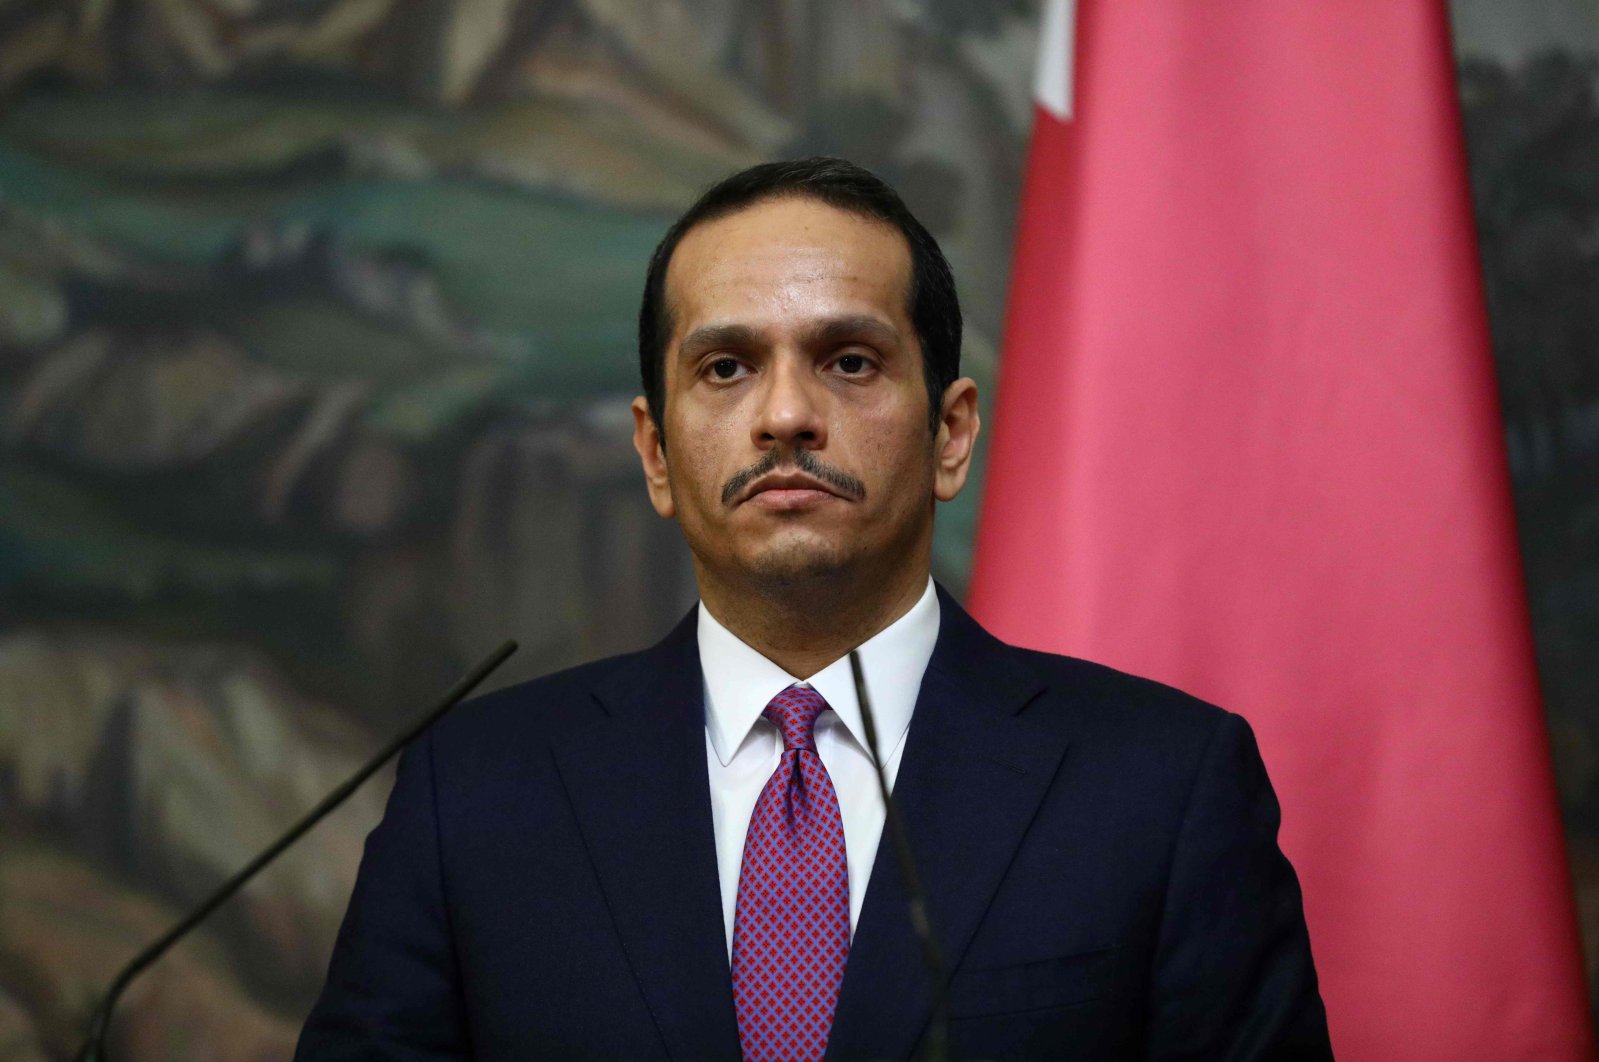 Qatari Foreign Minister Mohammed bin Abdulrahman Al Thani attends a news conference in Moscow, Russia, Dec. 23, 2020. (Russian Foreign Ministry handout photo via AFP)